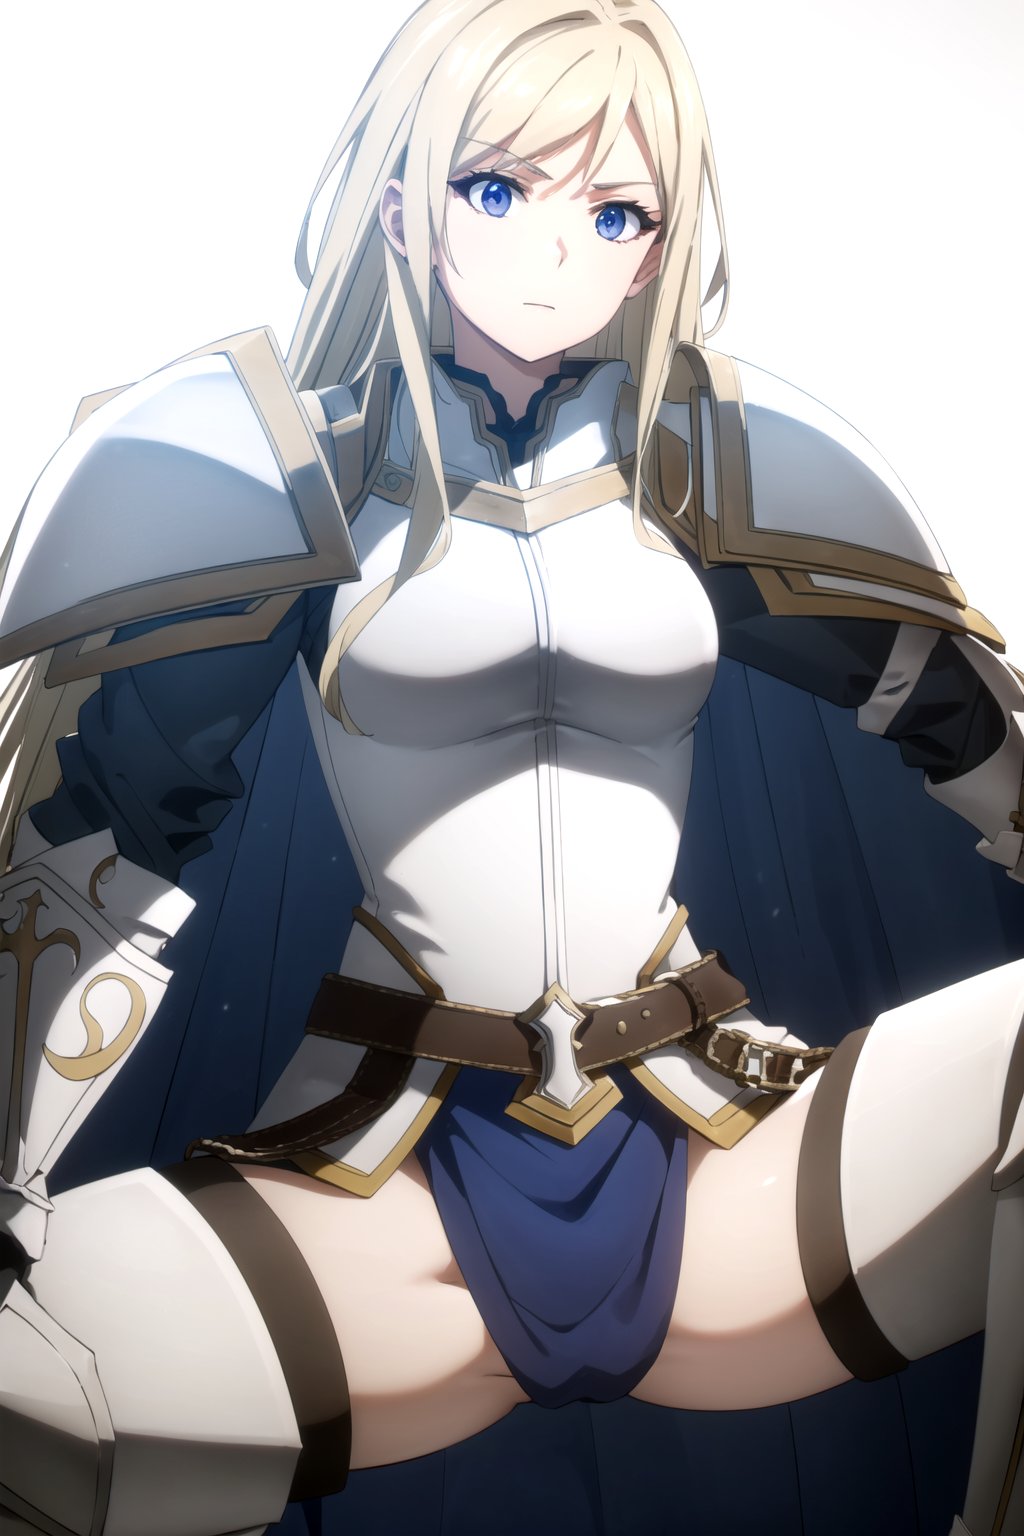 //Quality,
masterpiece, best quality
,//Character,
1girl, solo
,//Fashion, 
,//Background,
white_background
,//Others,
,spread legs, 
female knight, long hair, blue eyes, blonde hair, cape, armor, shoulder armor, gauntlets, pauldrons, breastplate, knight